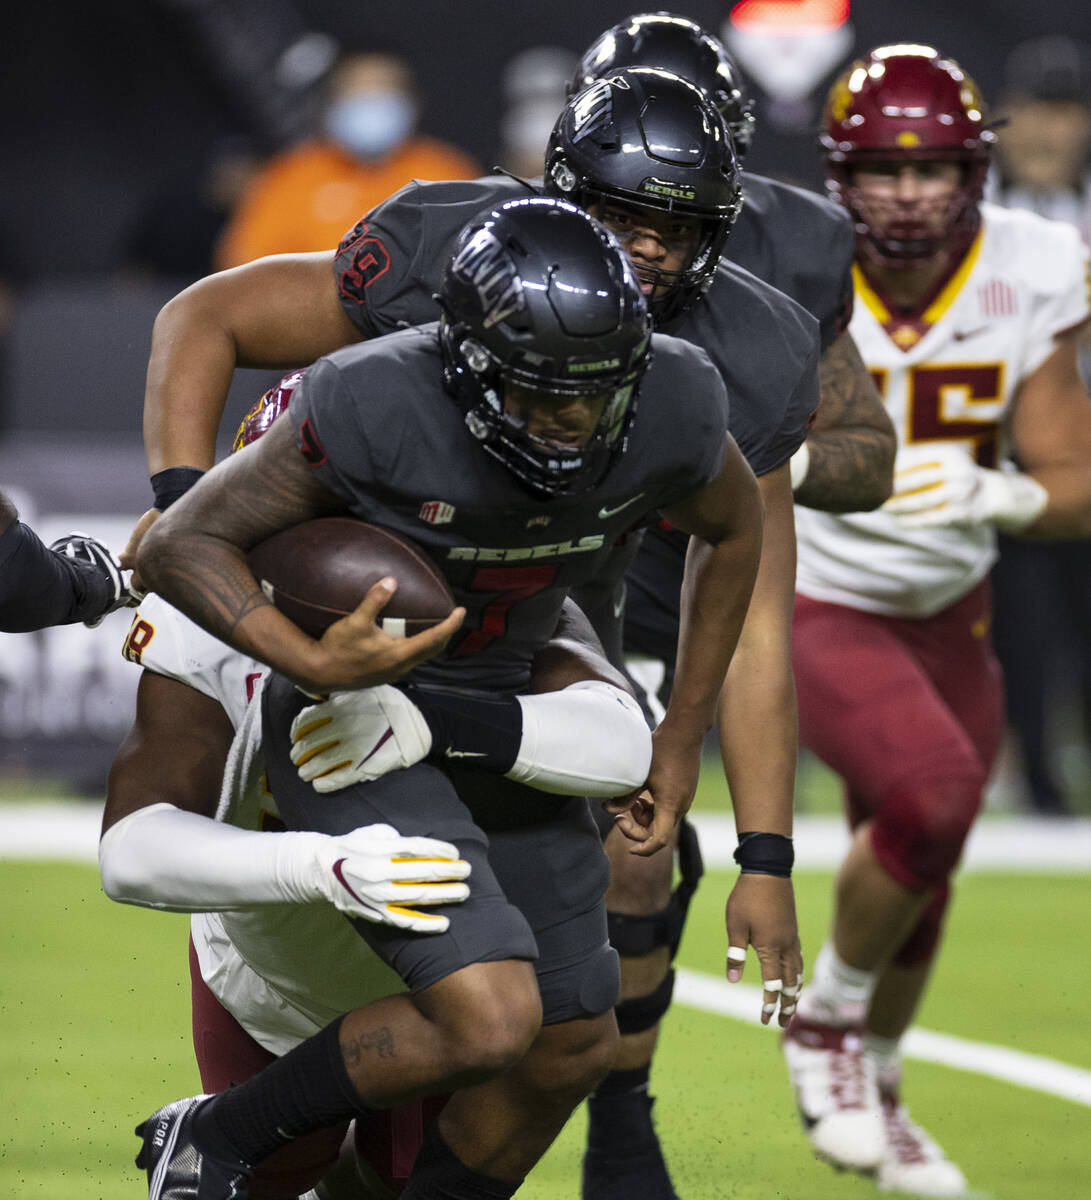 UNLV Rebels quarterback Cameron Friel (7) is sacked by Iowa State CycloneÕs defensive end Eyio ...